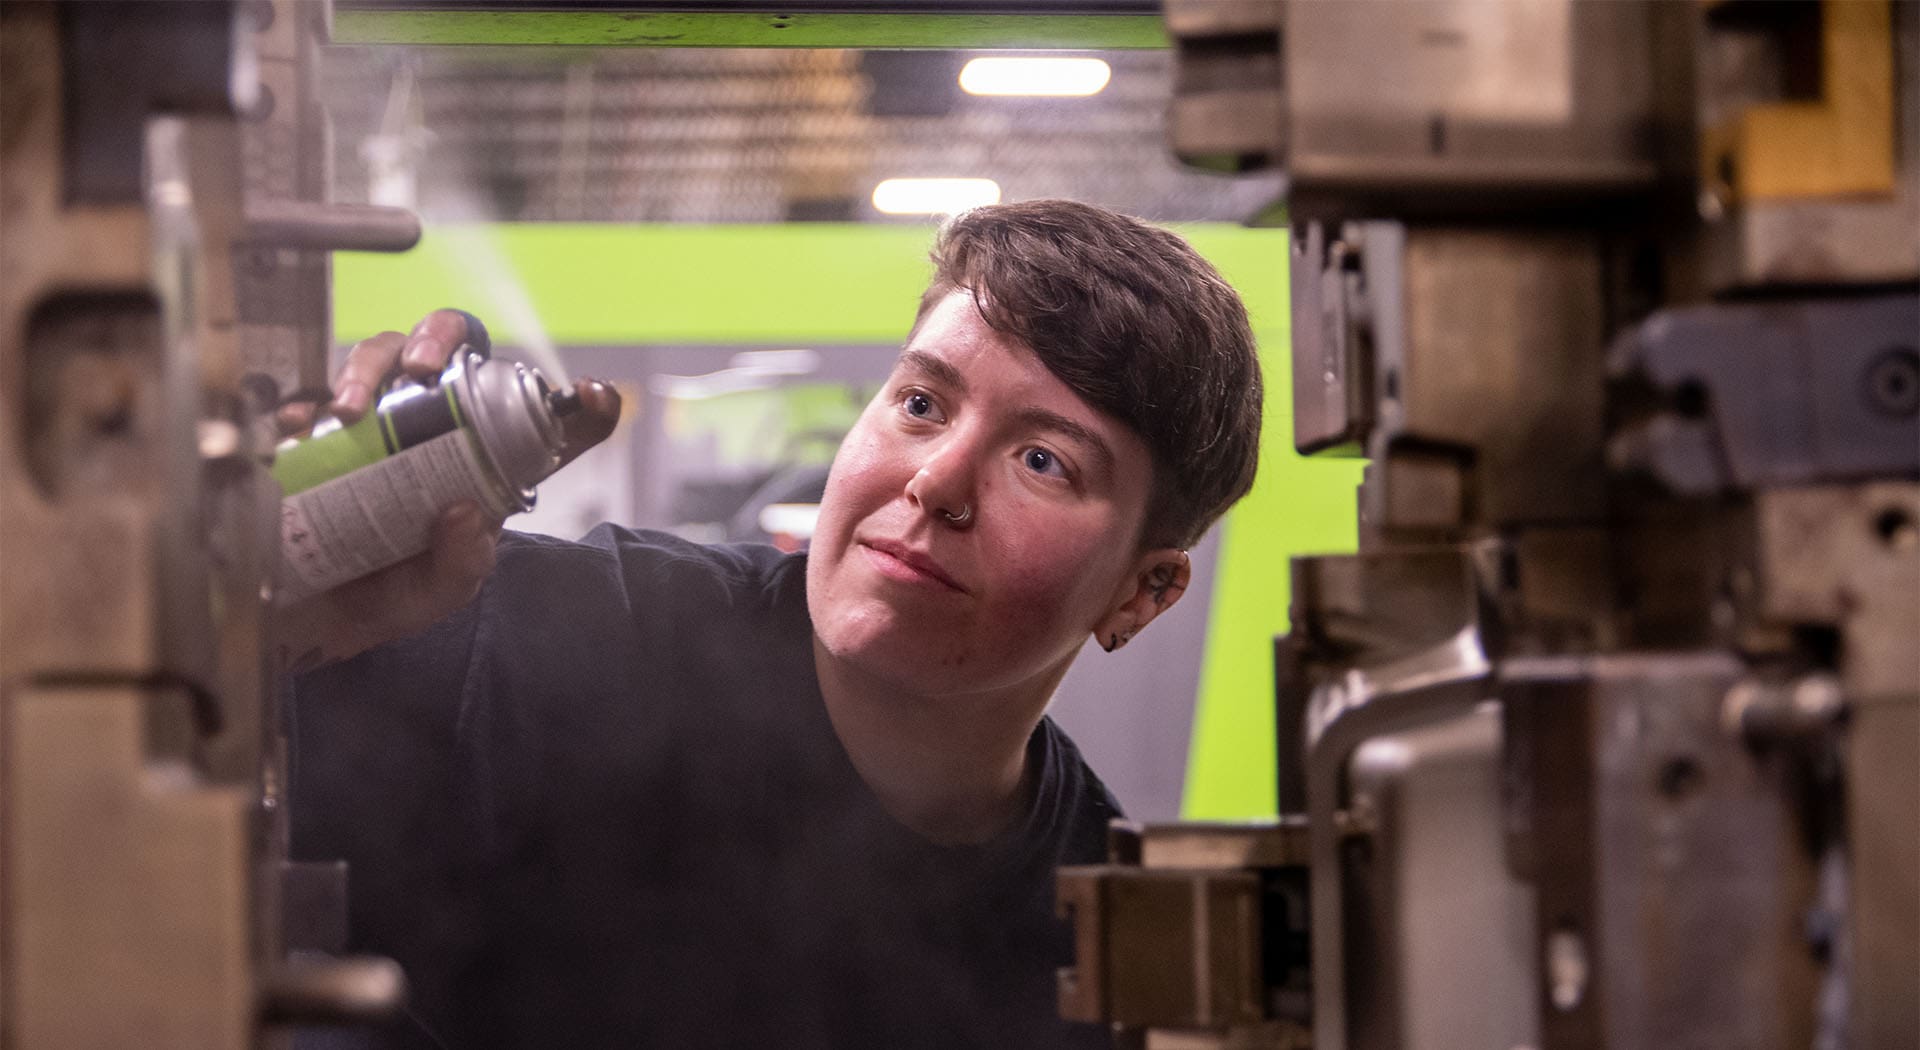 An apprentice works on a plastic injection molding machine in Tacoma, Washington.